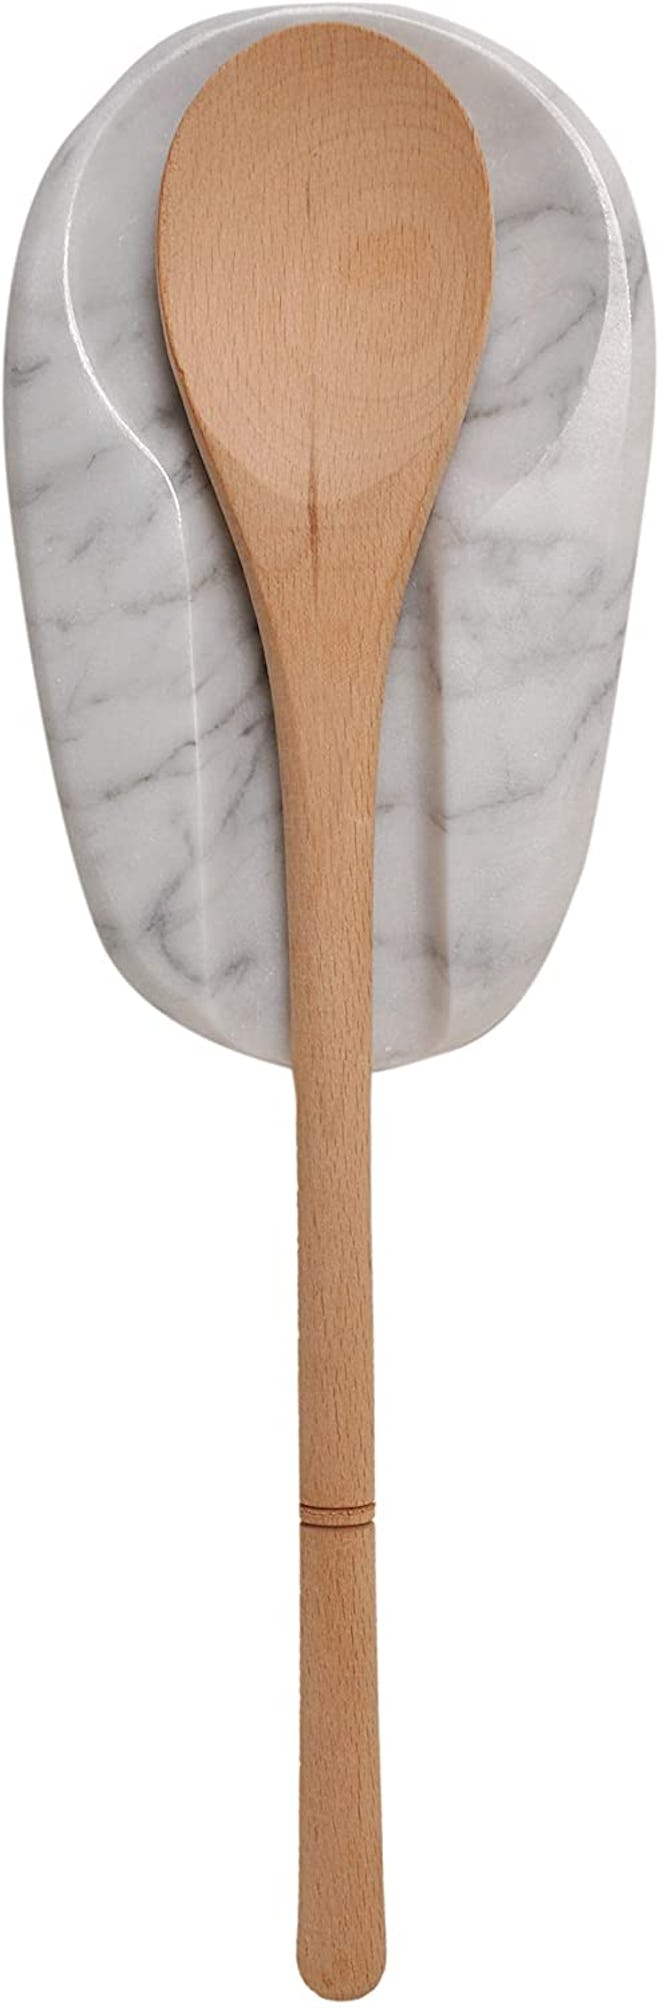 CraftsOfEgypt Marble Spoon Rest